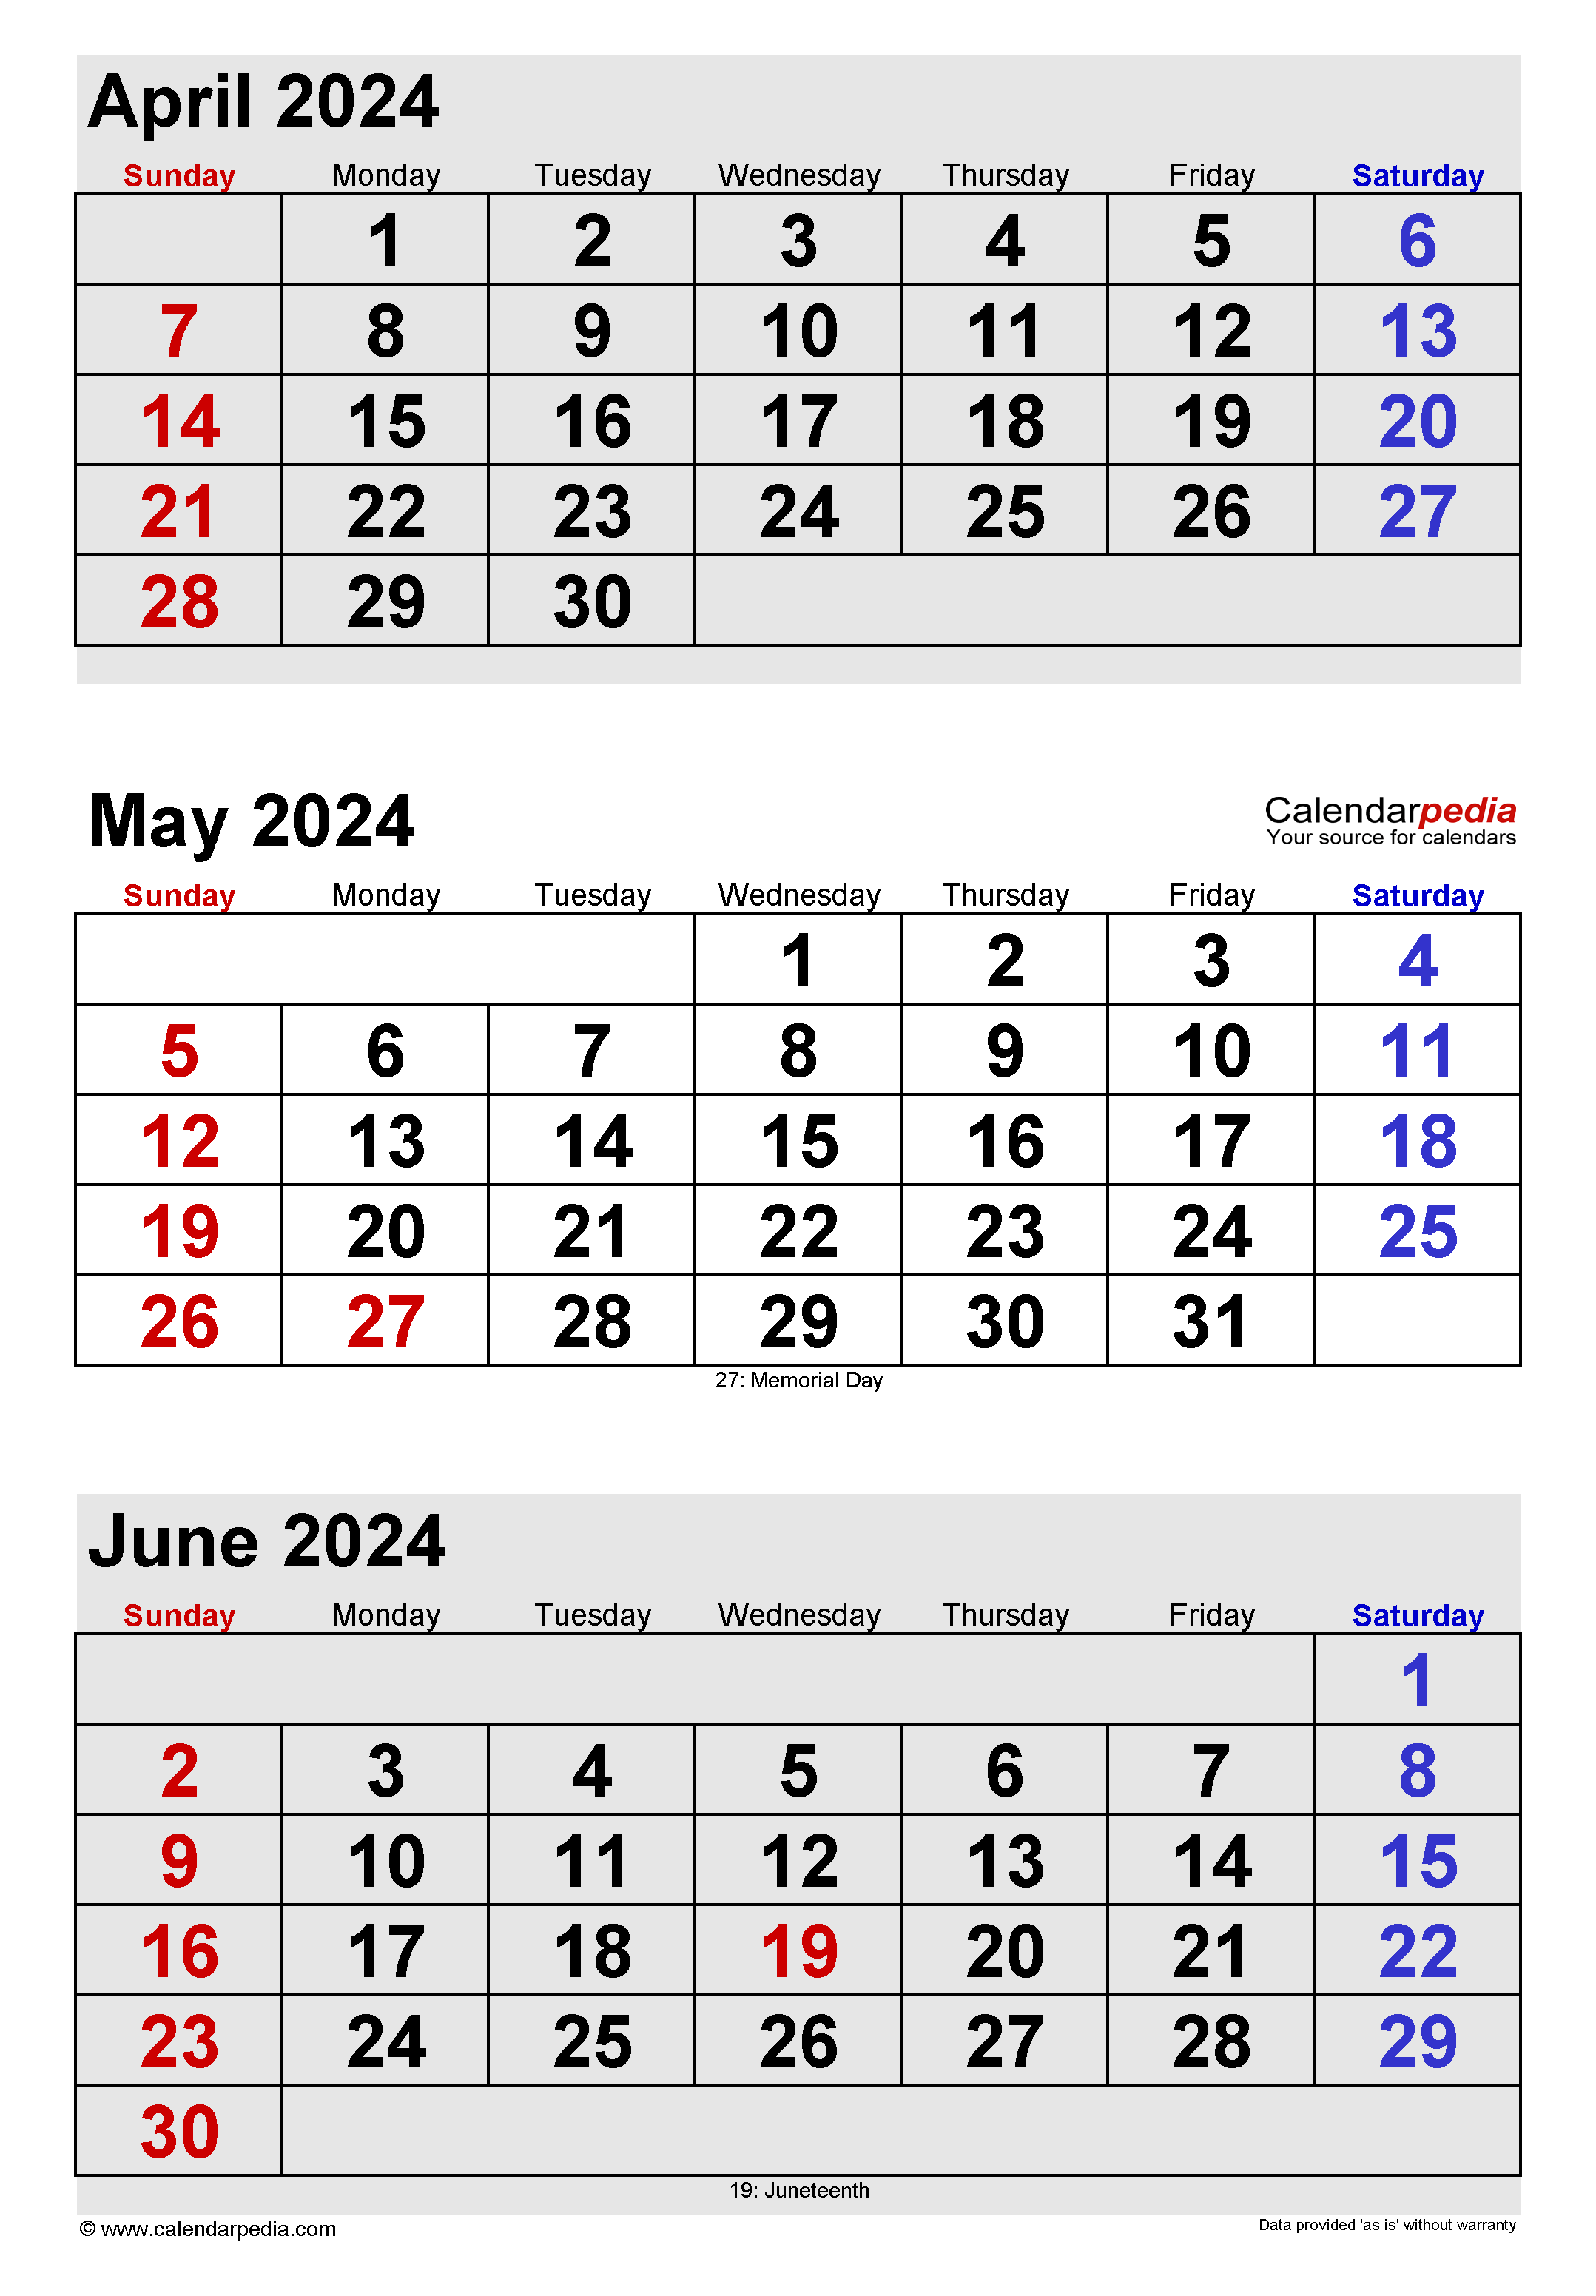 May 2024 Calendar | Templates For Word, Excel And Pdf within Calendar Of April And May 2024